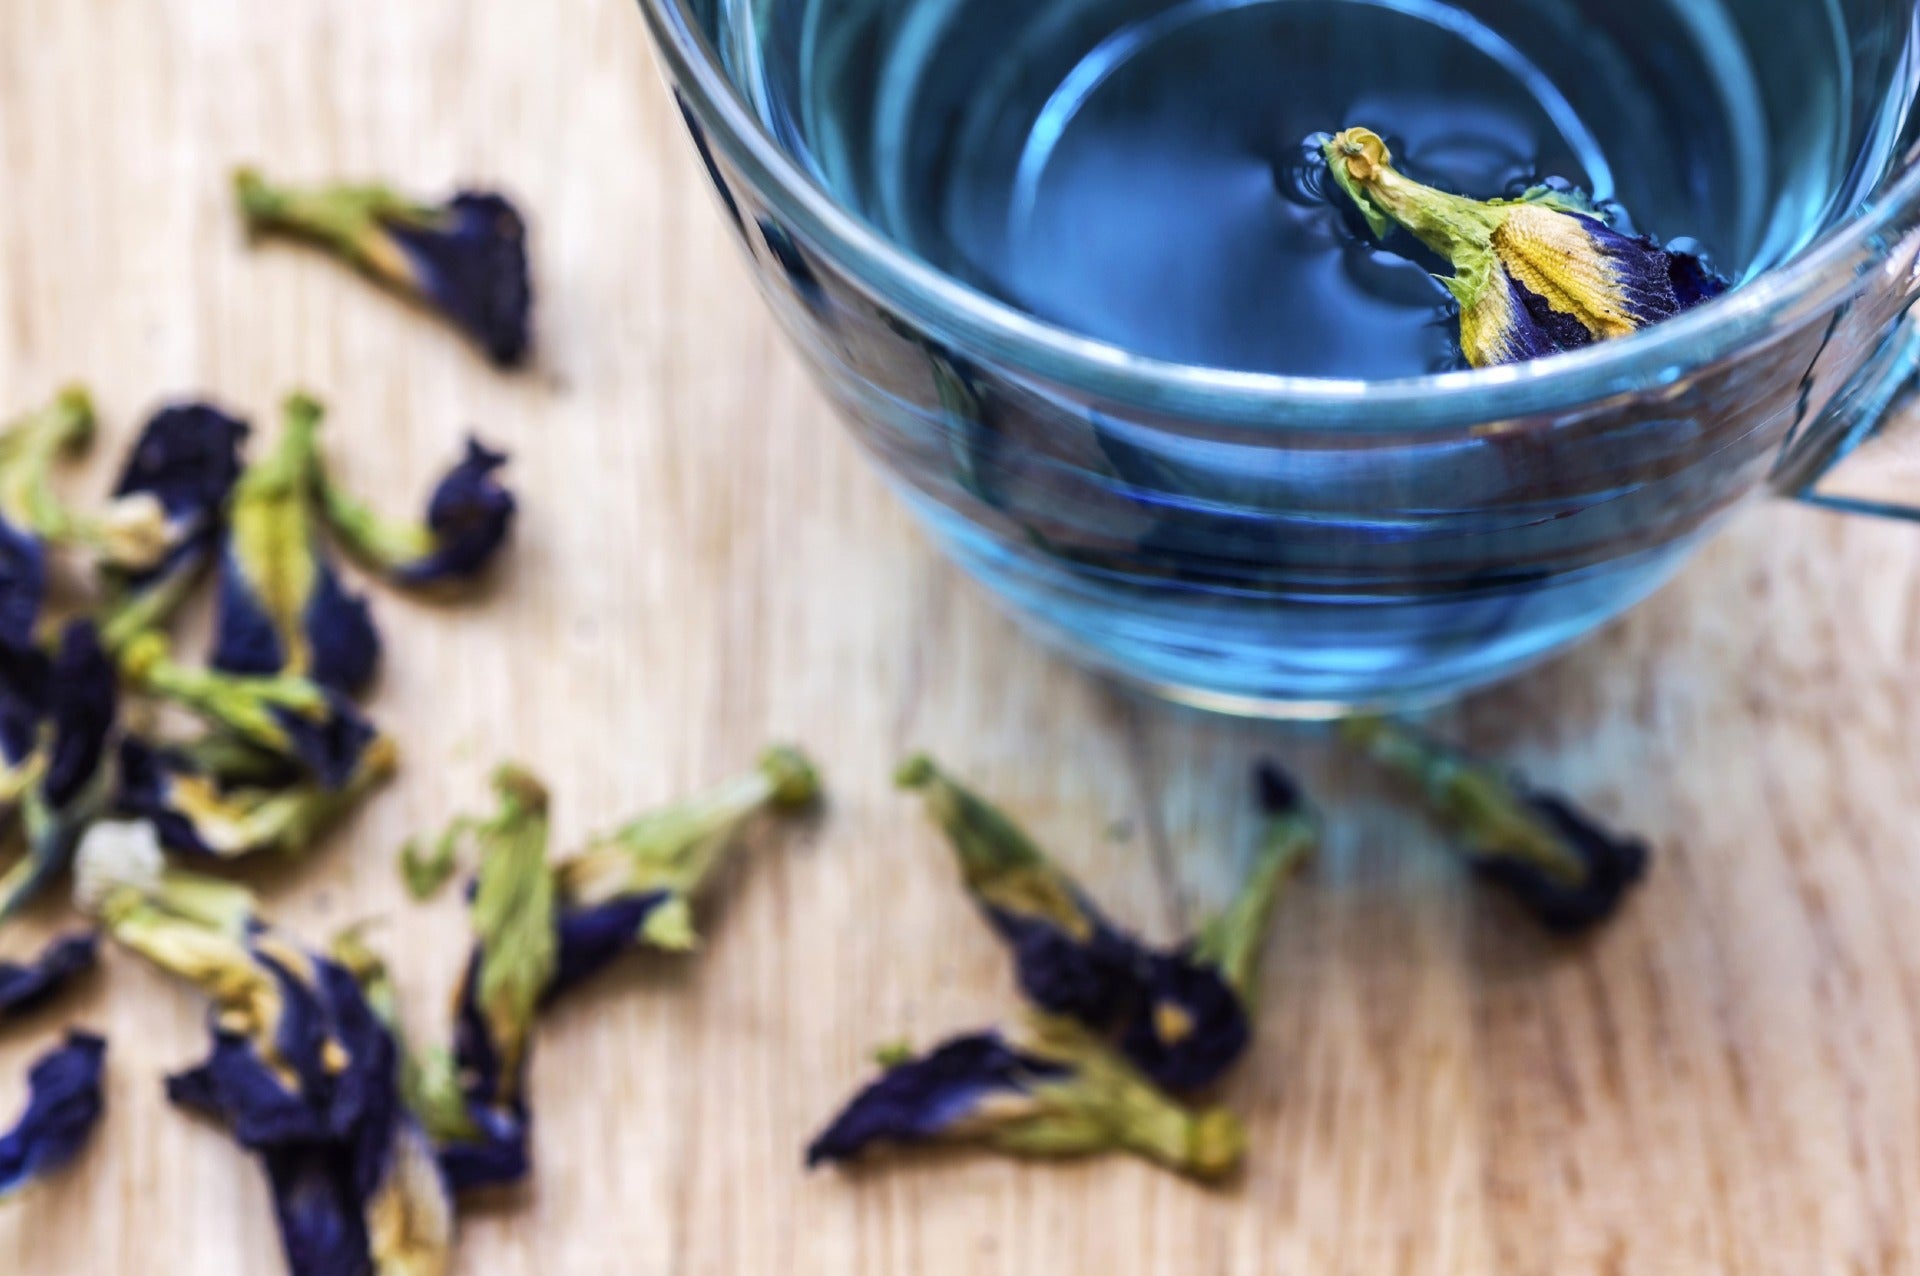 Image of loose leaf butterfly pea flower scattered on a table next to a glass cup of beautifully blue brewed tea made from the flower